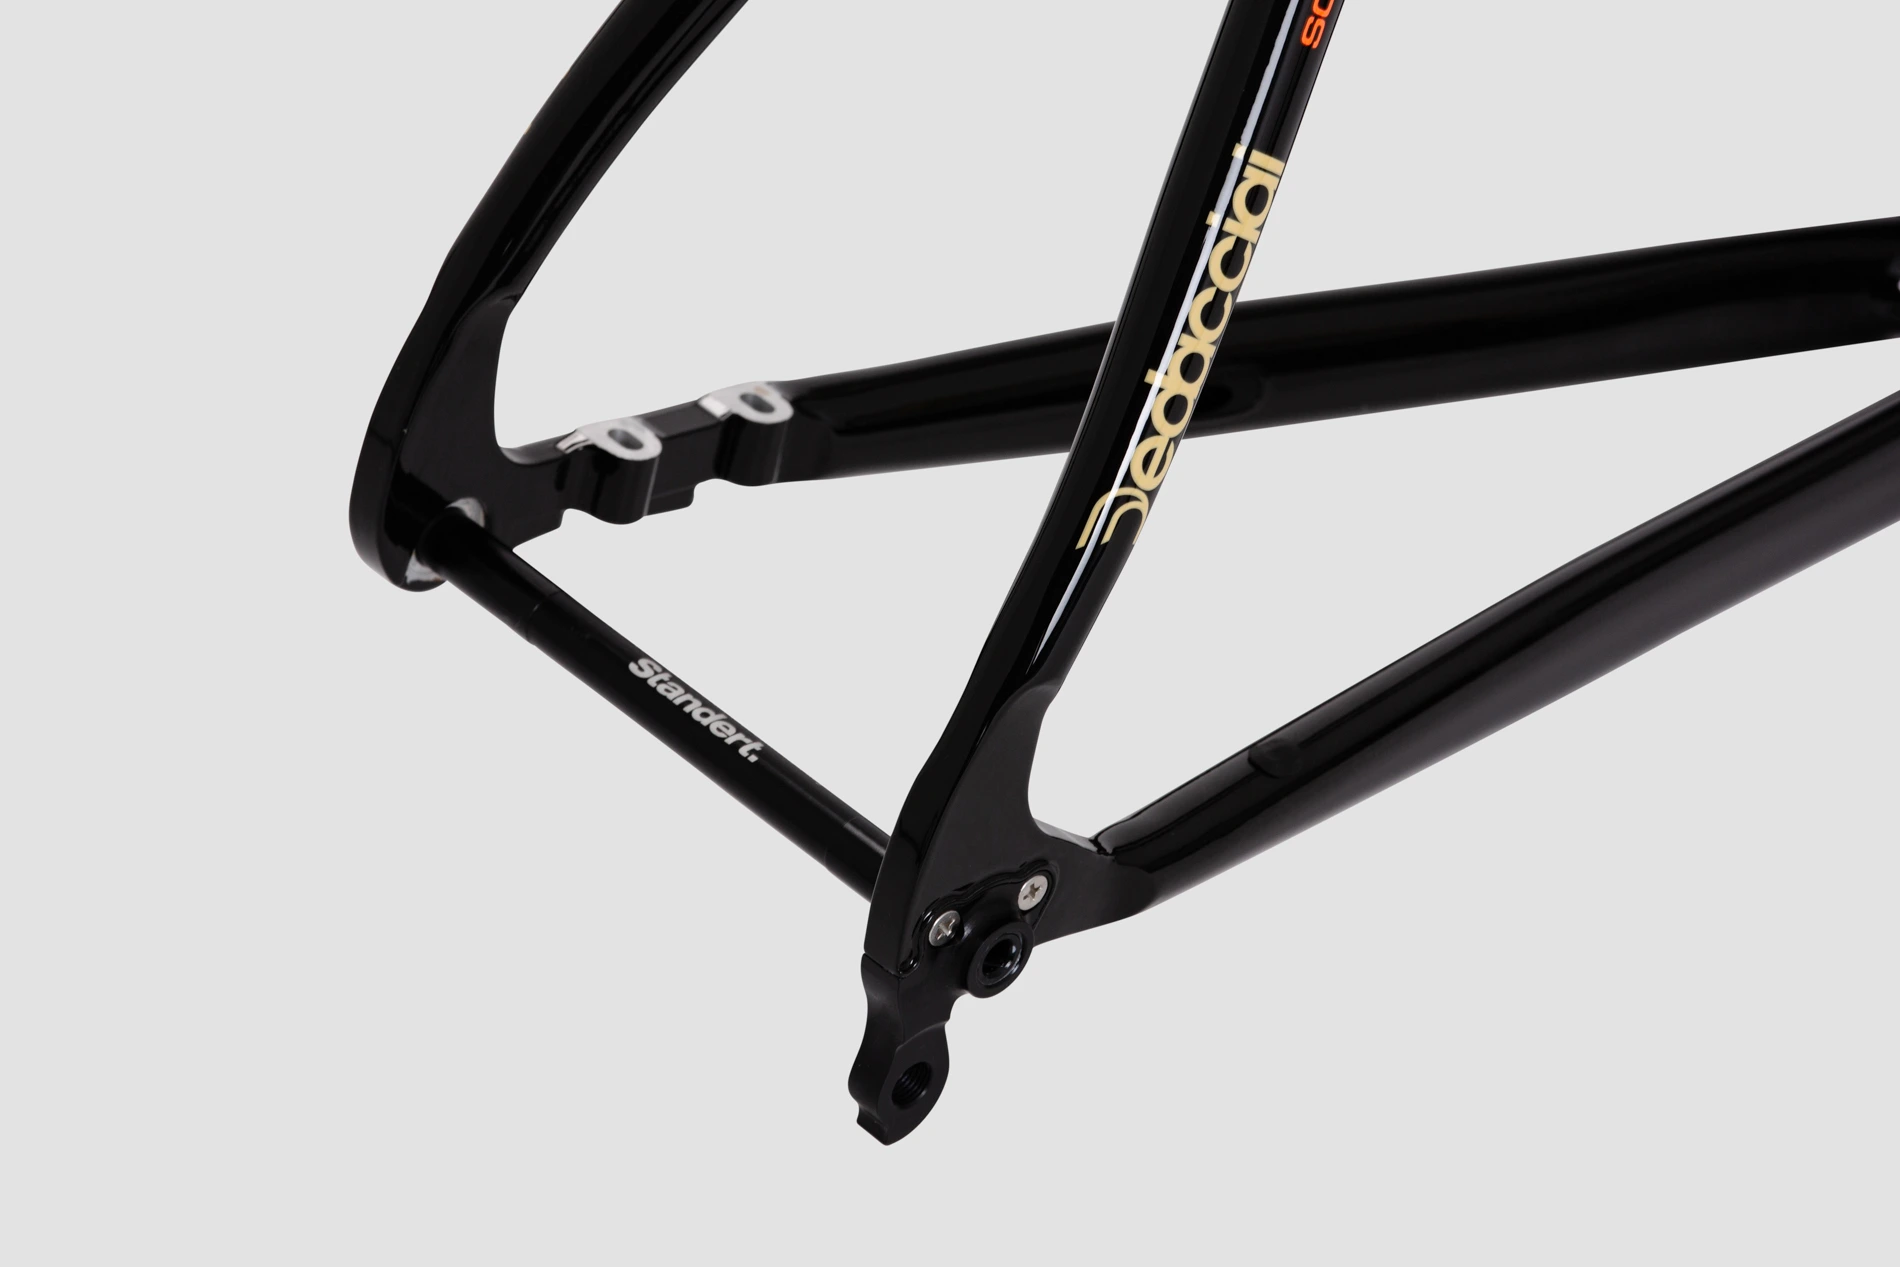 Kreissage RS Analogue Edition Road Bike Frame Dropouts